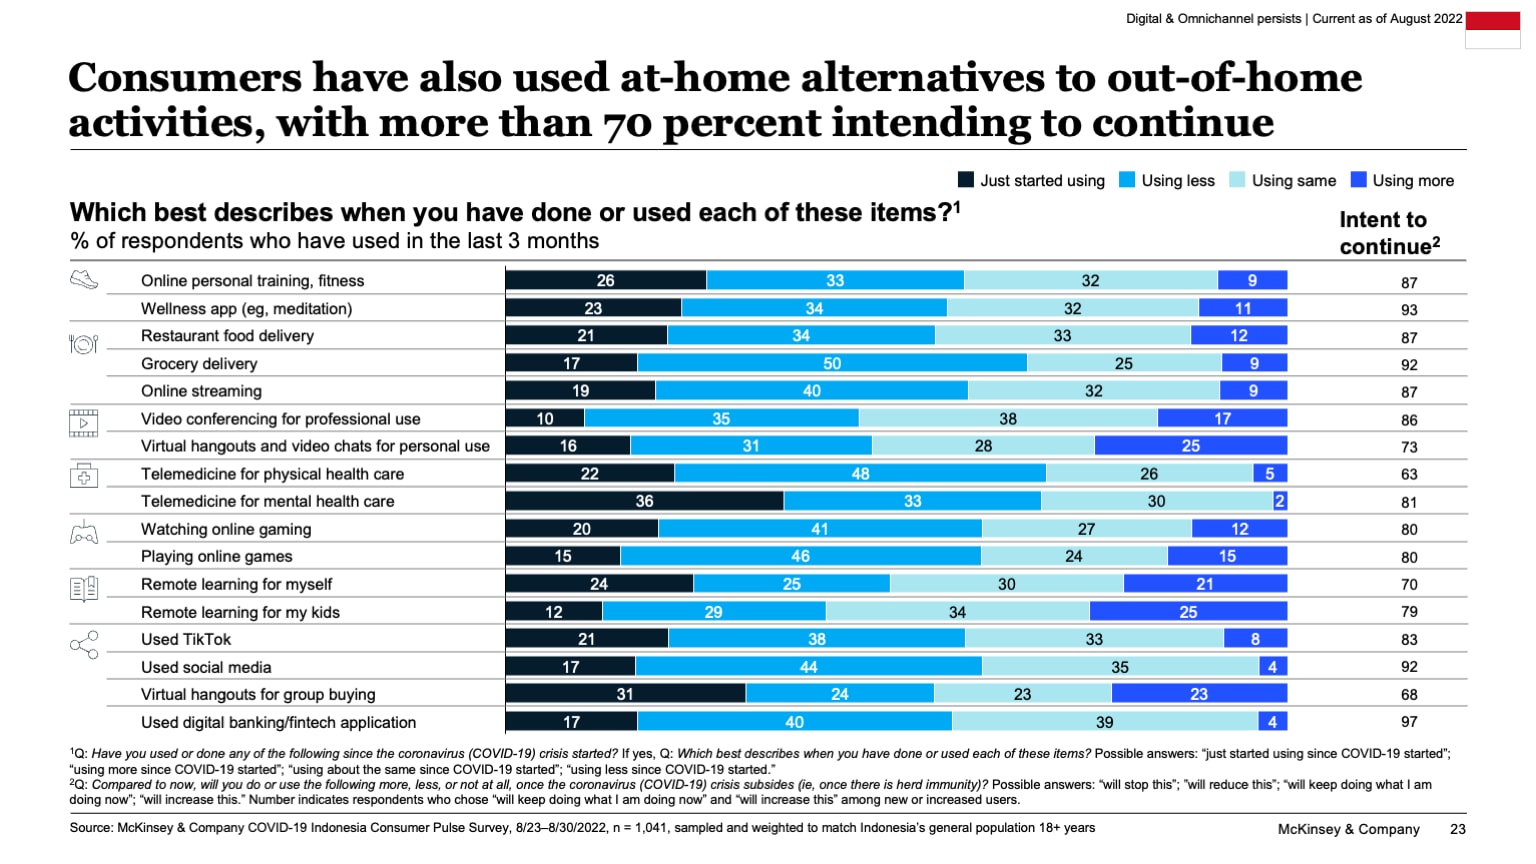 Consumers have also used at-home alternatives to out-of-home activities, with more than 70 percent intending to continue